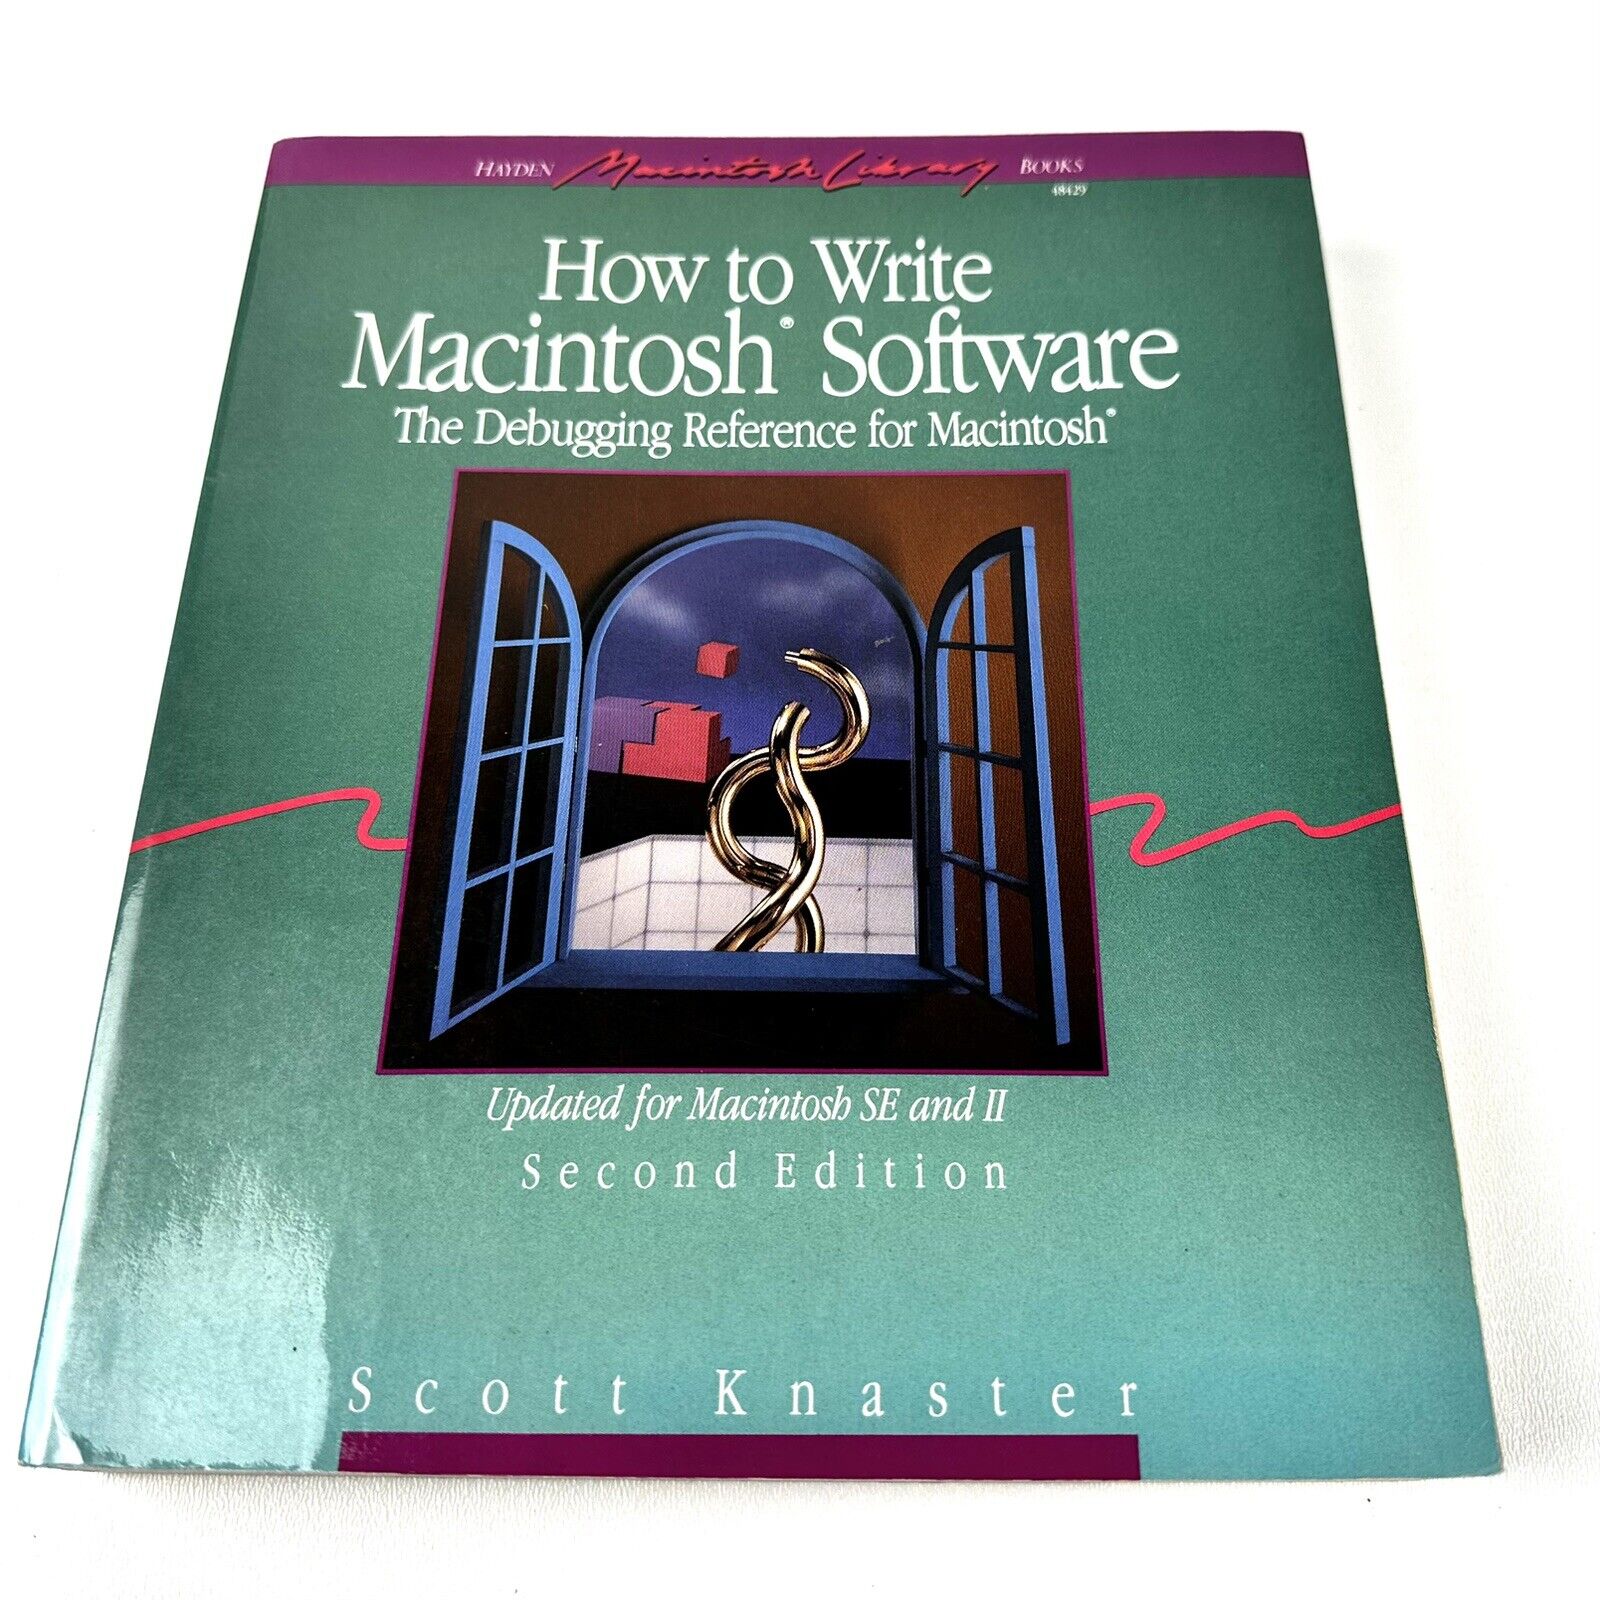 Macintosh Library Books - How To Write Macintosh Software - Excellent 